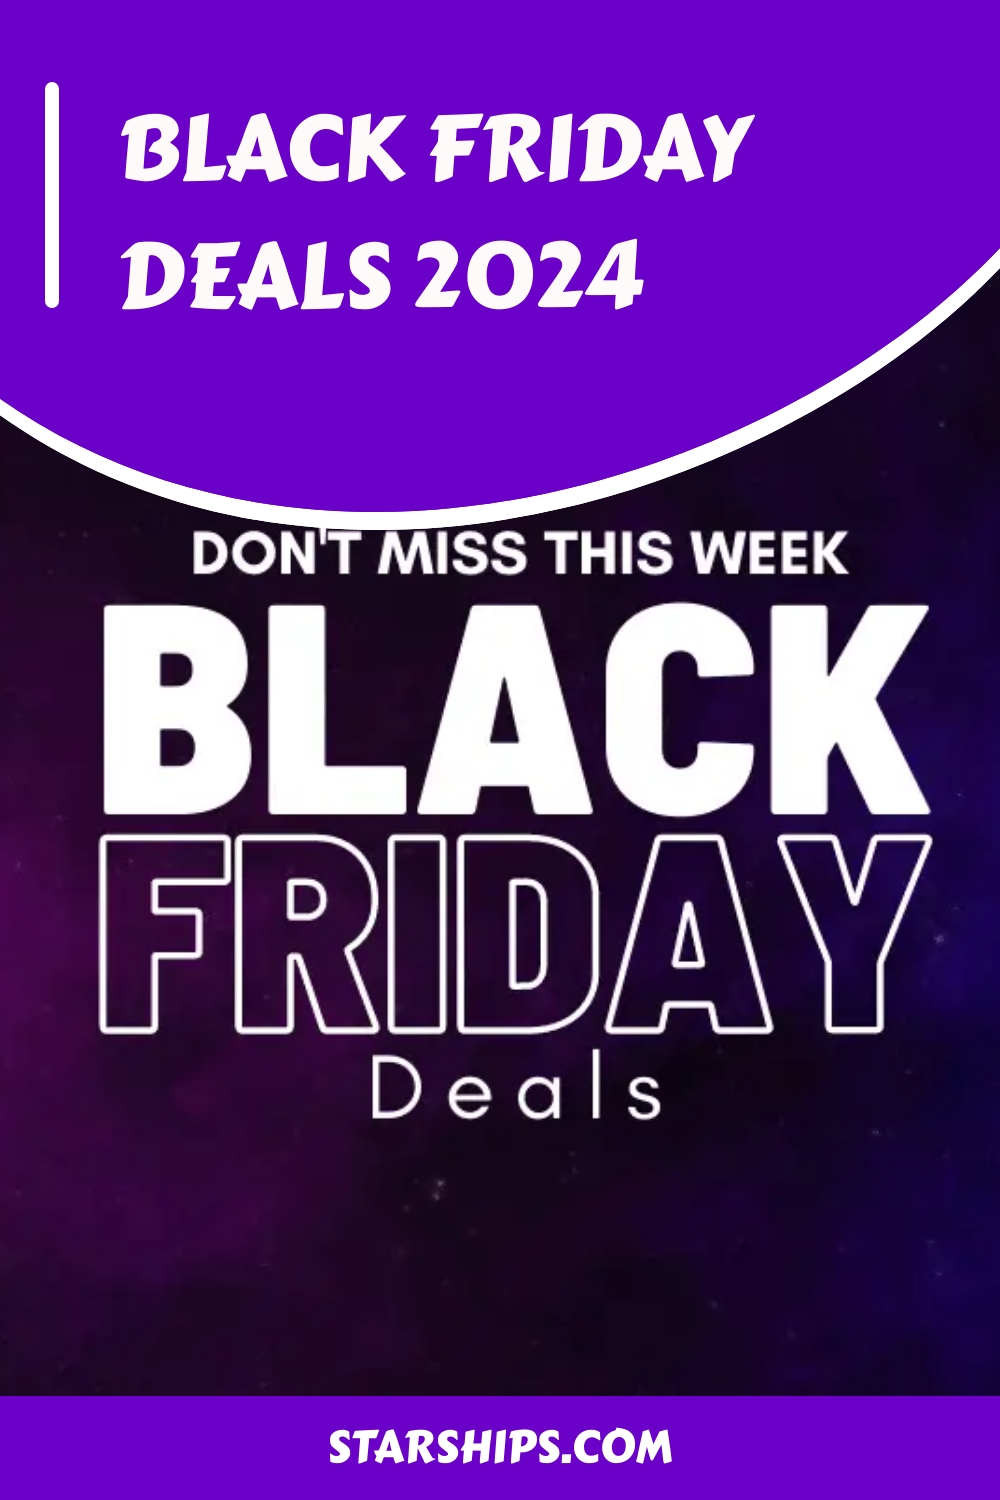 Black Friday Deals 2024 generated pin 57201